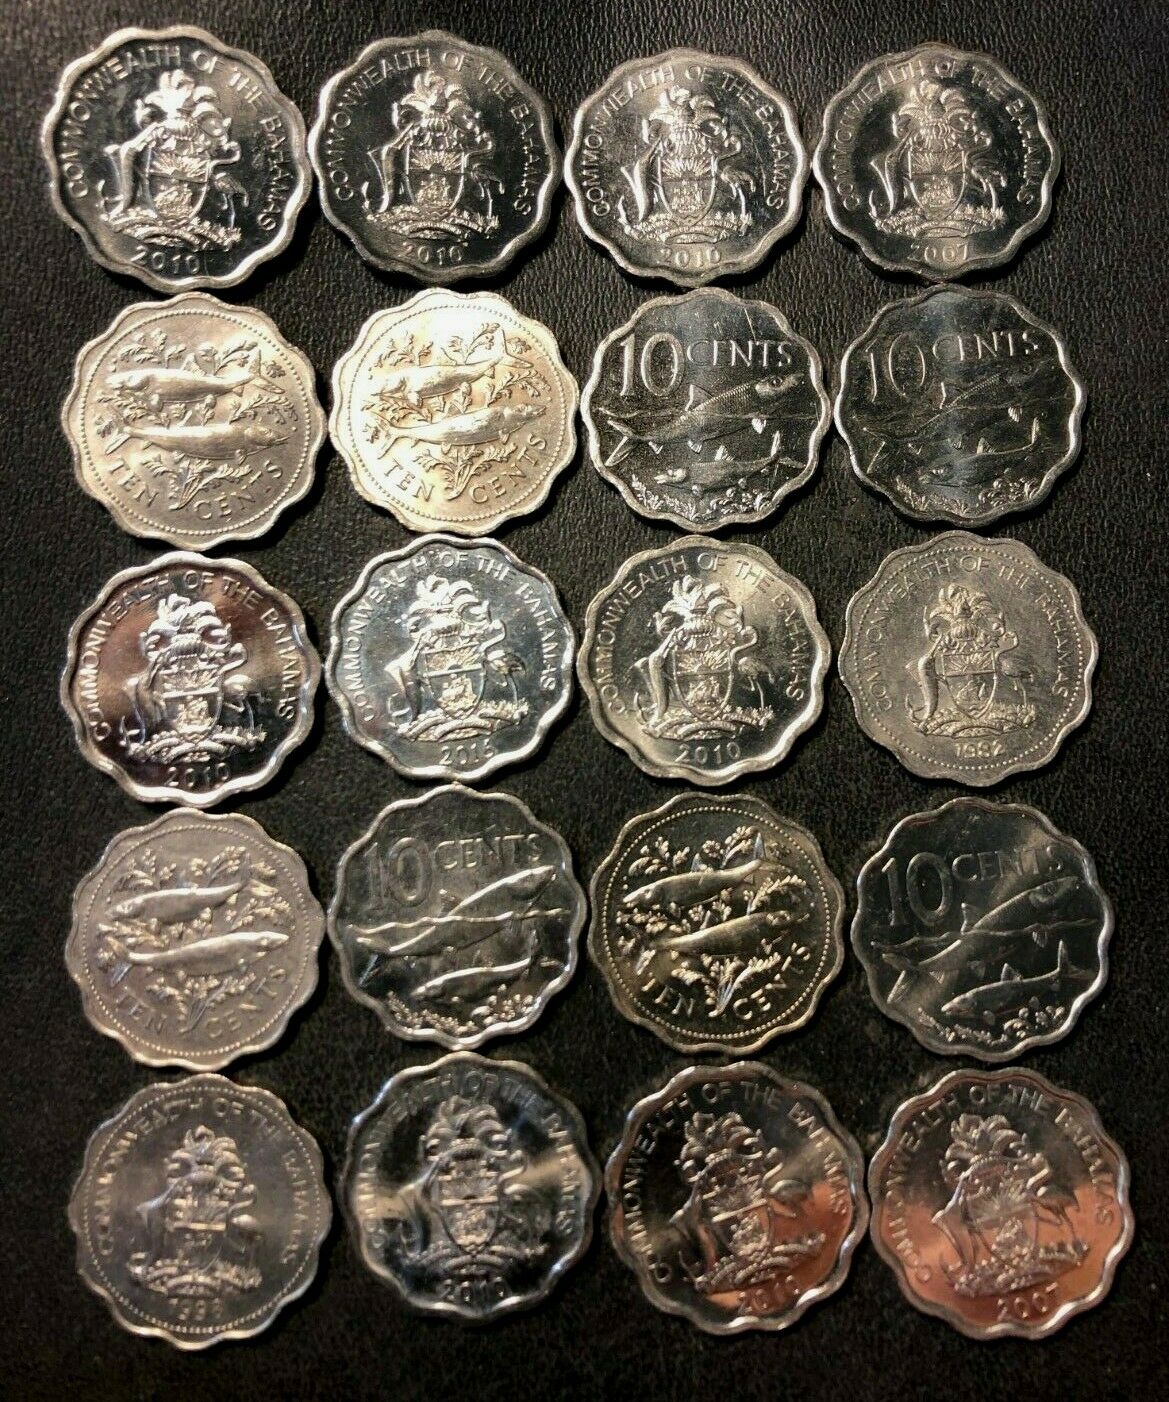 Old Bahamas Coin Lot - 10 Cent - 20 Excellent Low Mintage Coins - Free Shipping